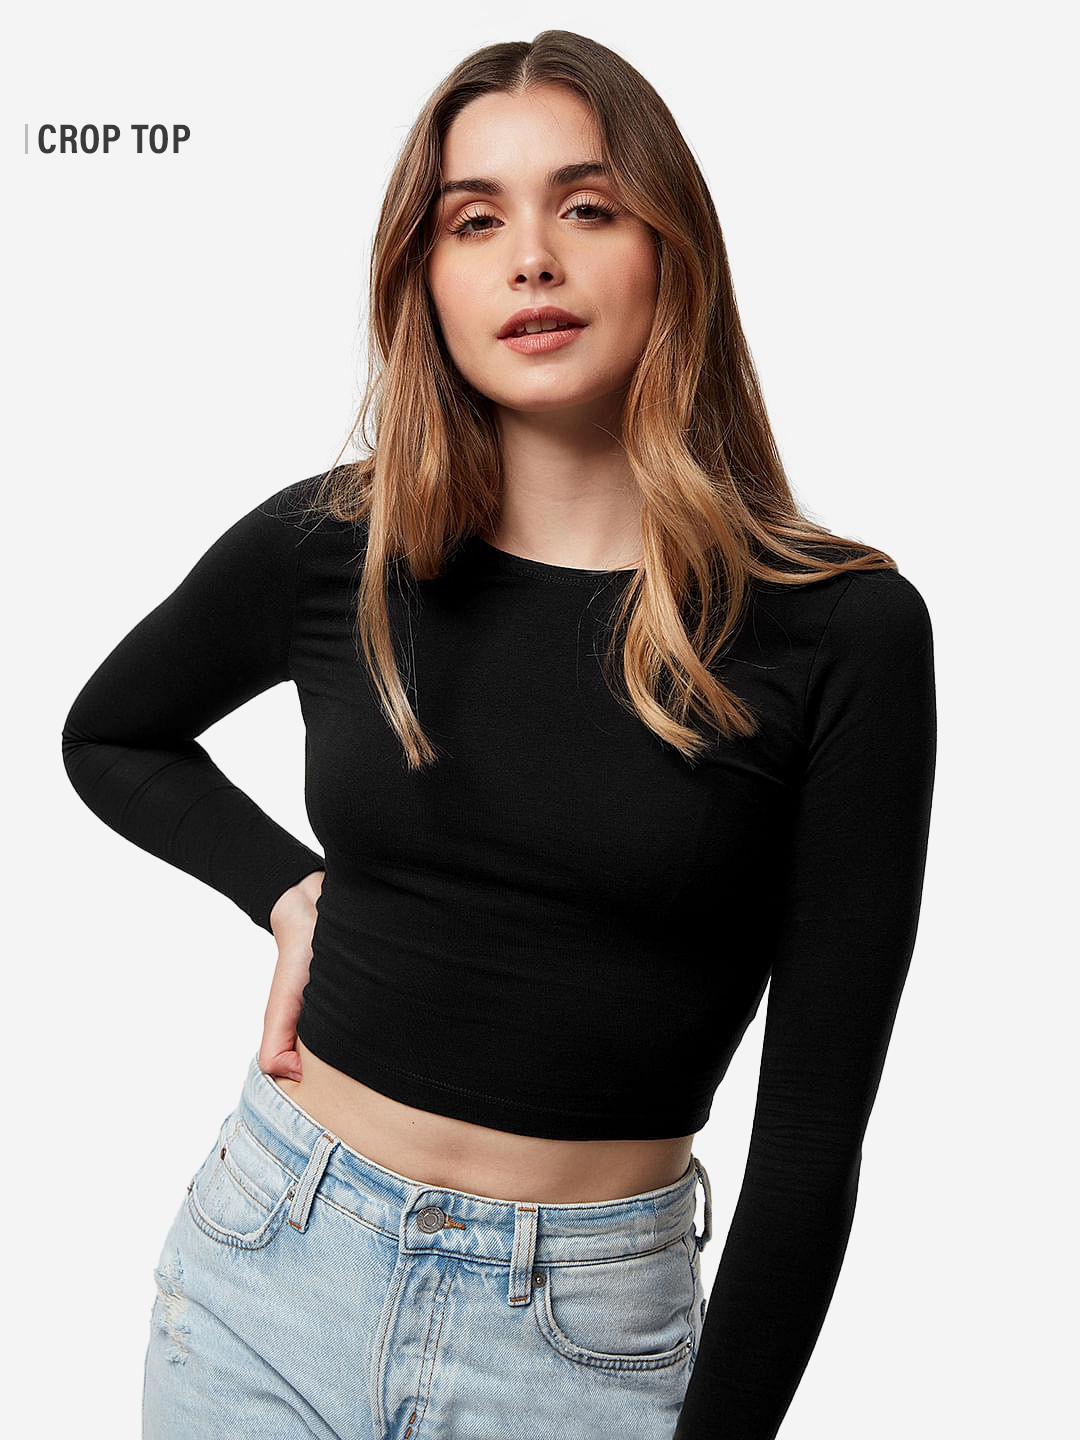 The Souled Store | Women's Solids: Black (Cropped Fit) Women's Cropped Tops